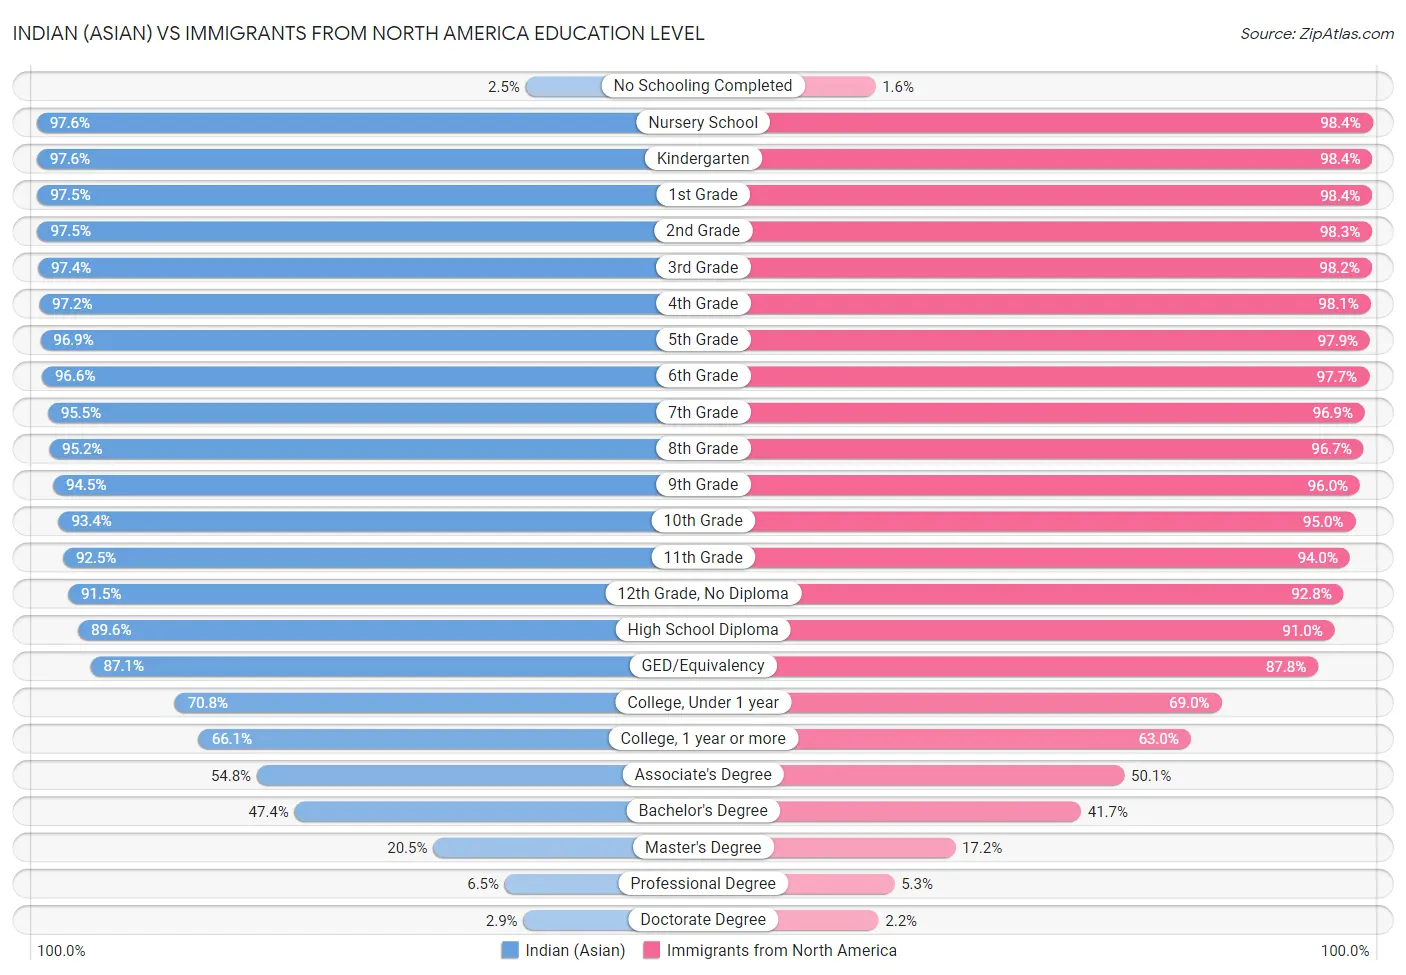 Indian (Asian) vs Immigrants from North America Education Level